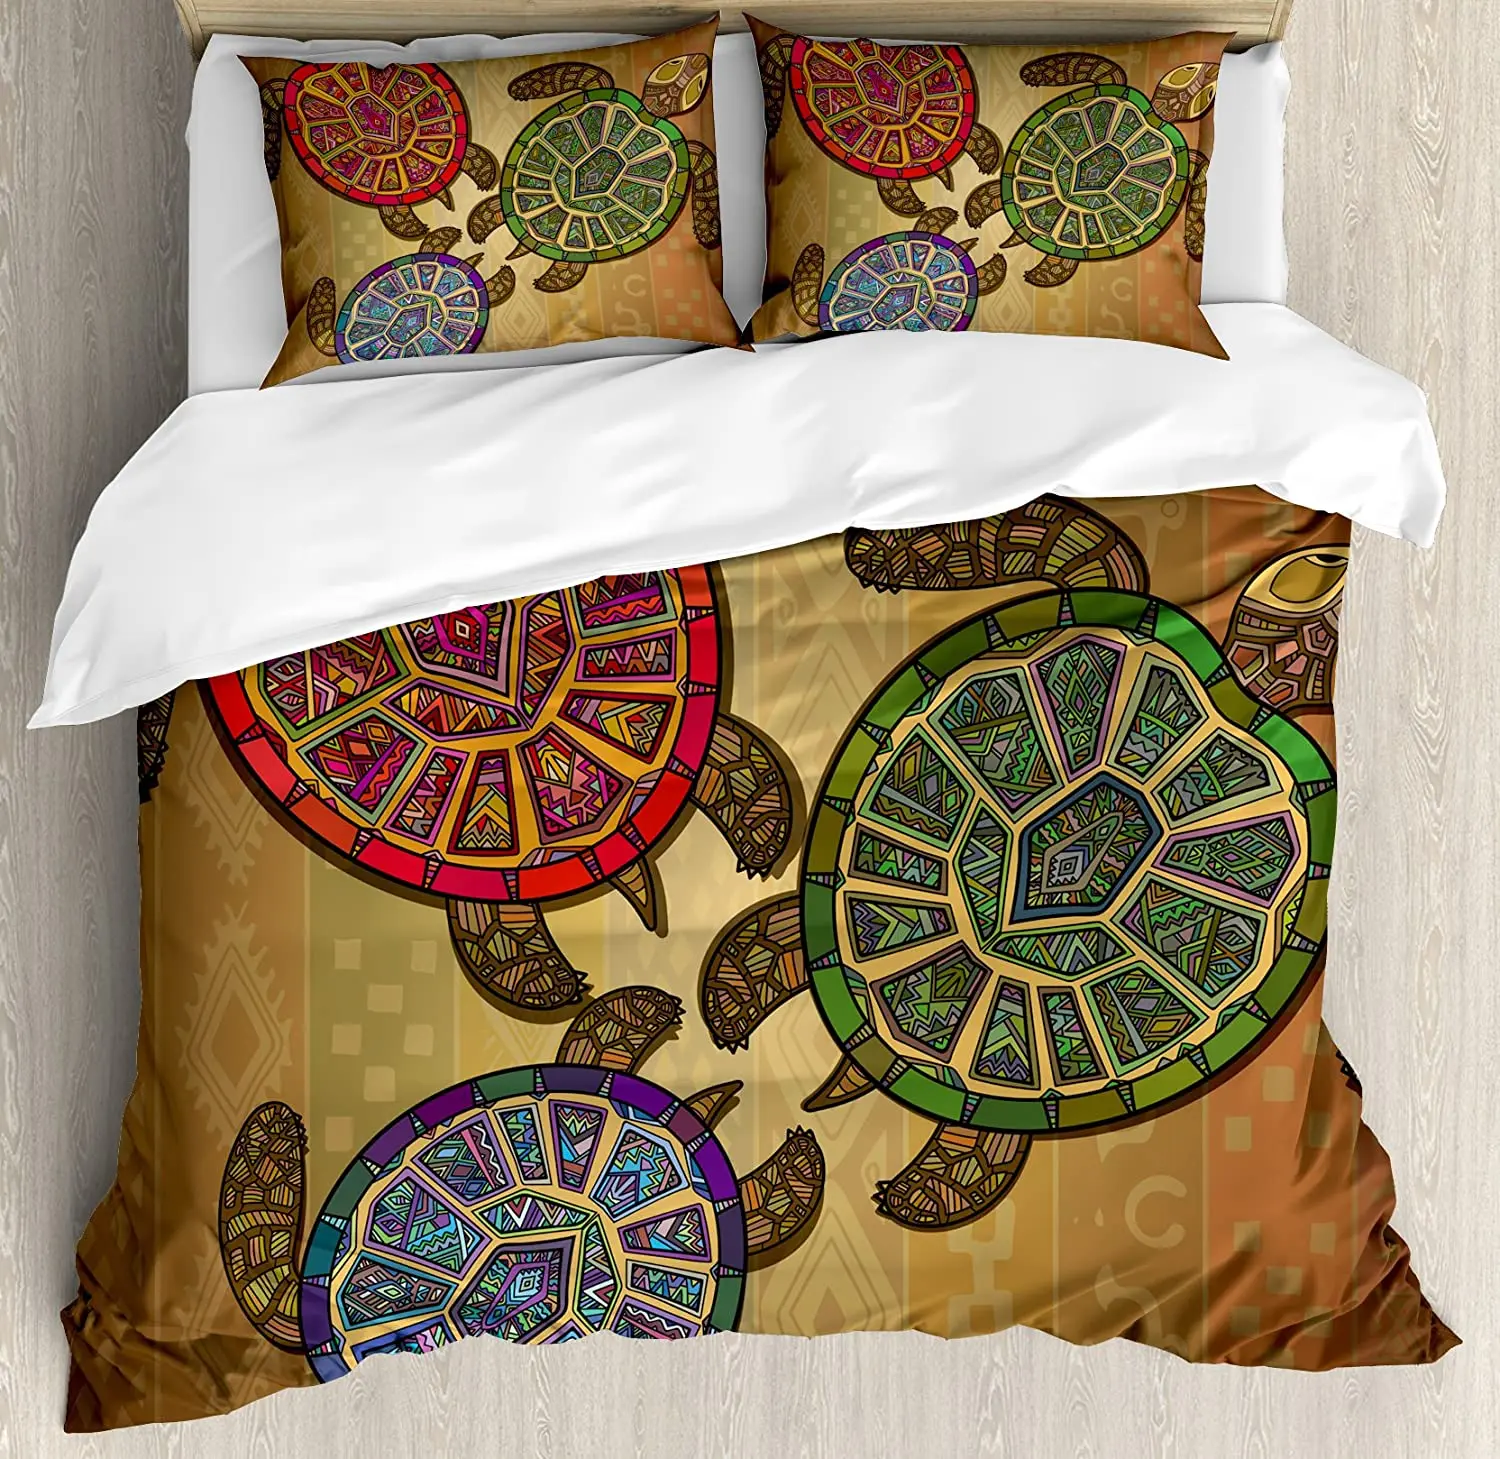 

Turtle Bedding Set For Bedroom Bed Home Three Ocean Turtles Ethic Style Animals Geometric Duvet Cover Quilt Cover And Pillowcase